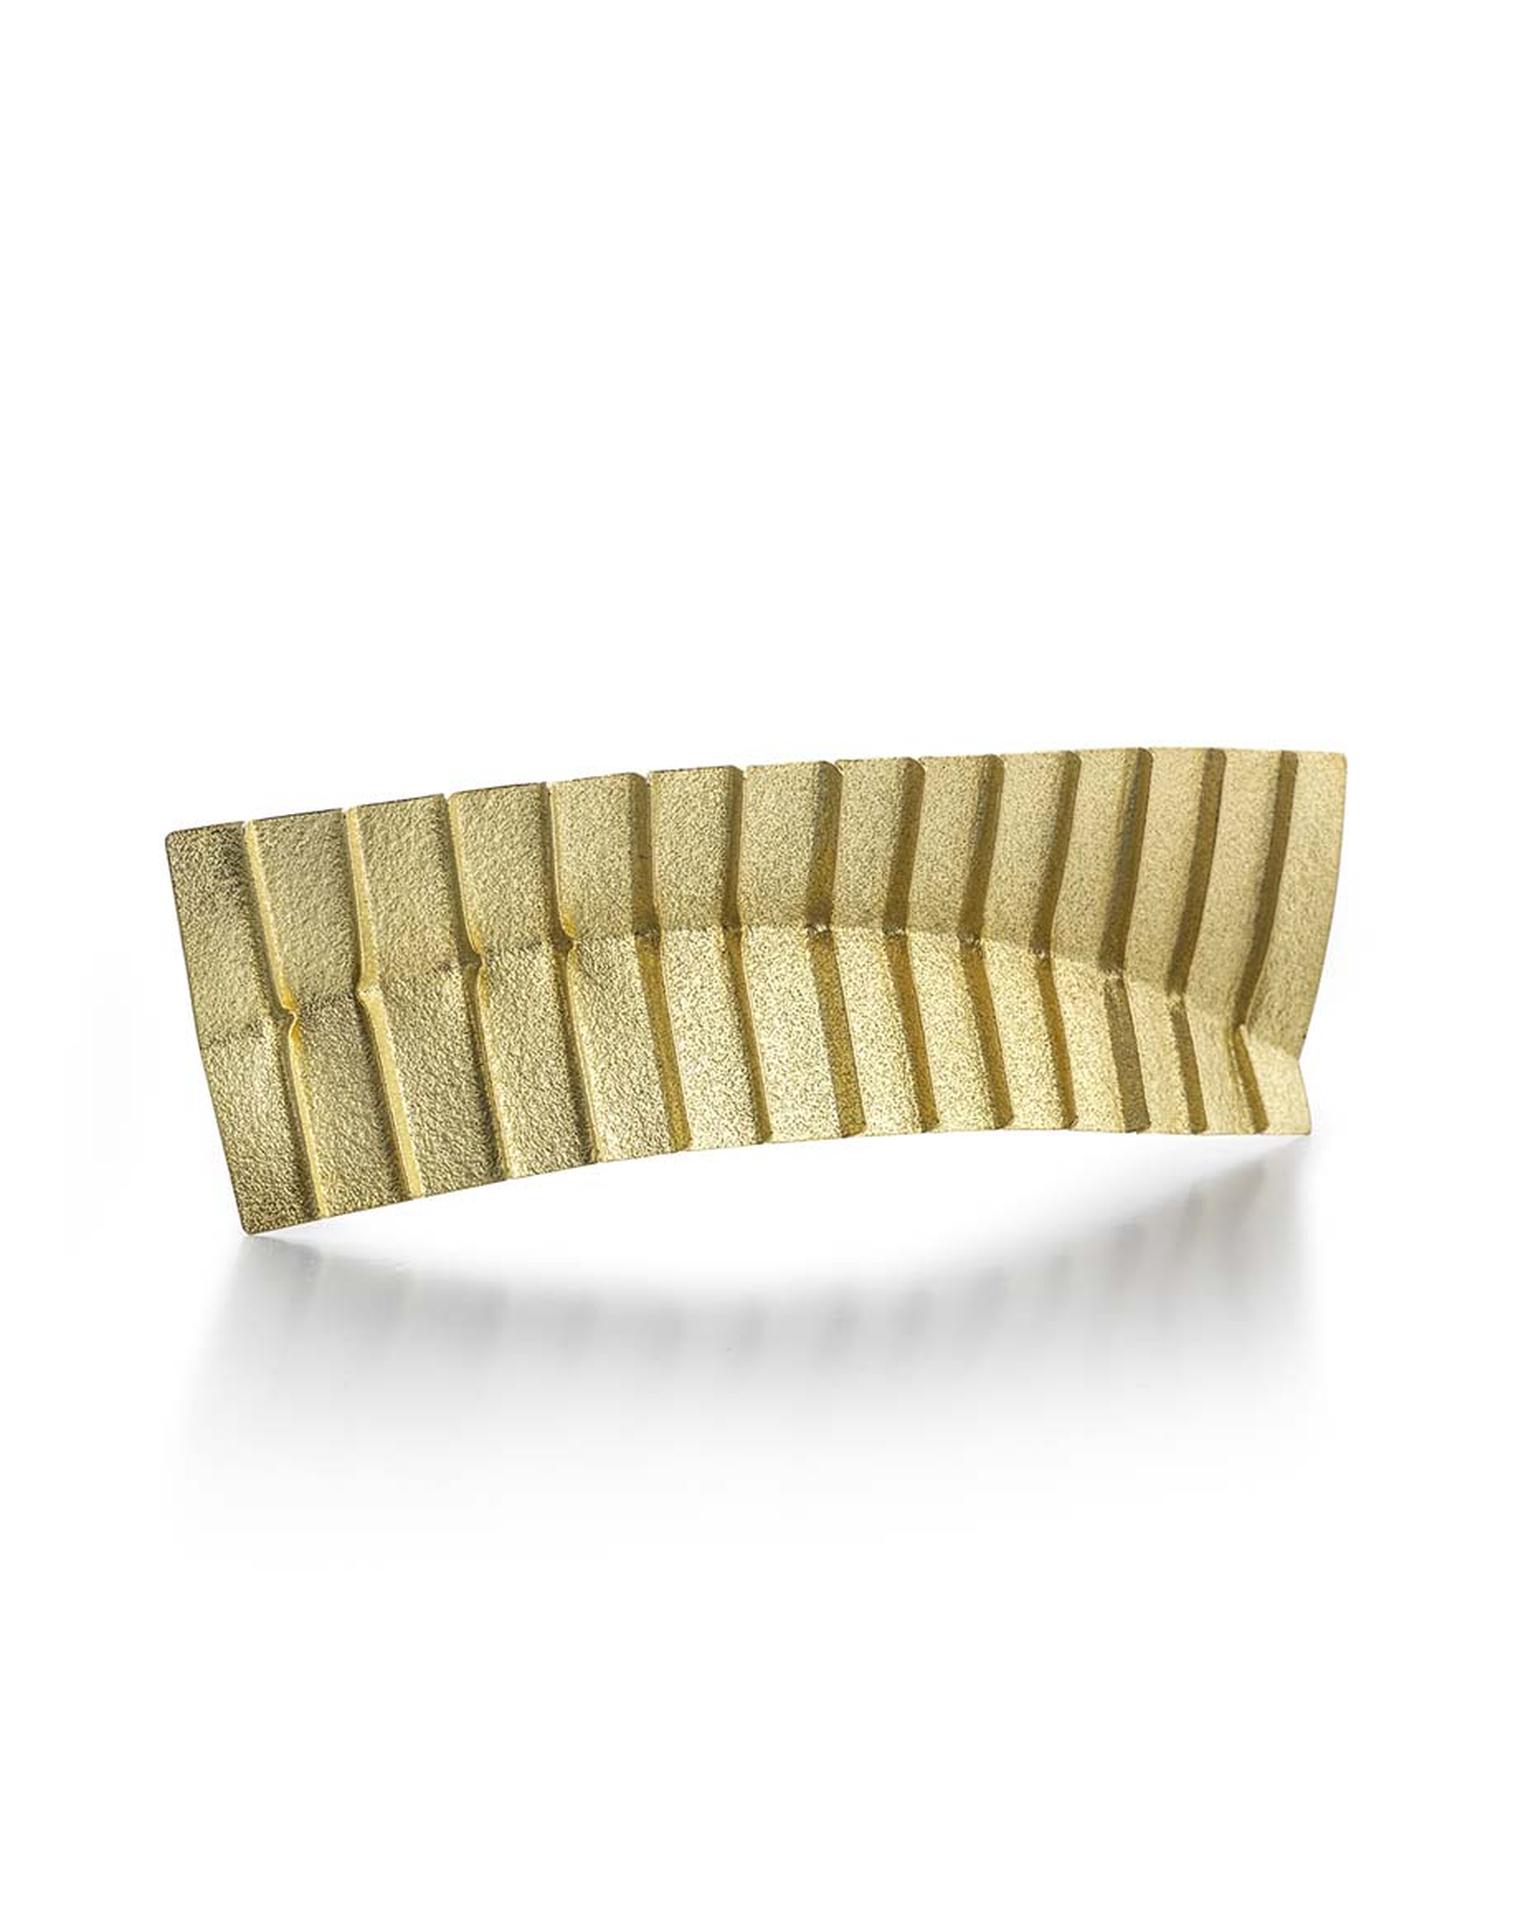 Jacqueline Mina OBE rectilinear pleated brooch in gold (£2,860).